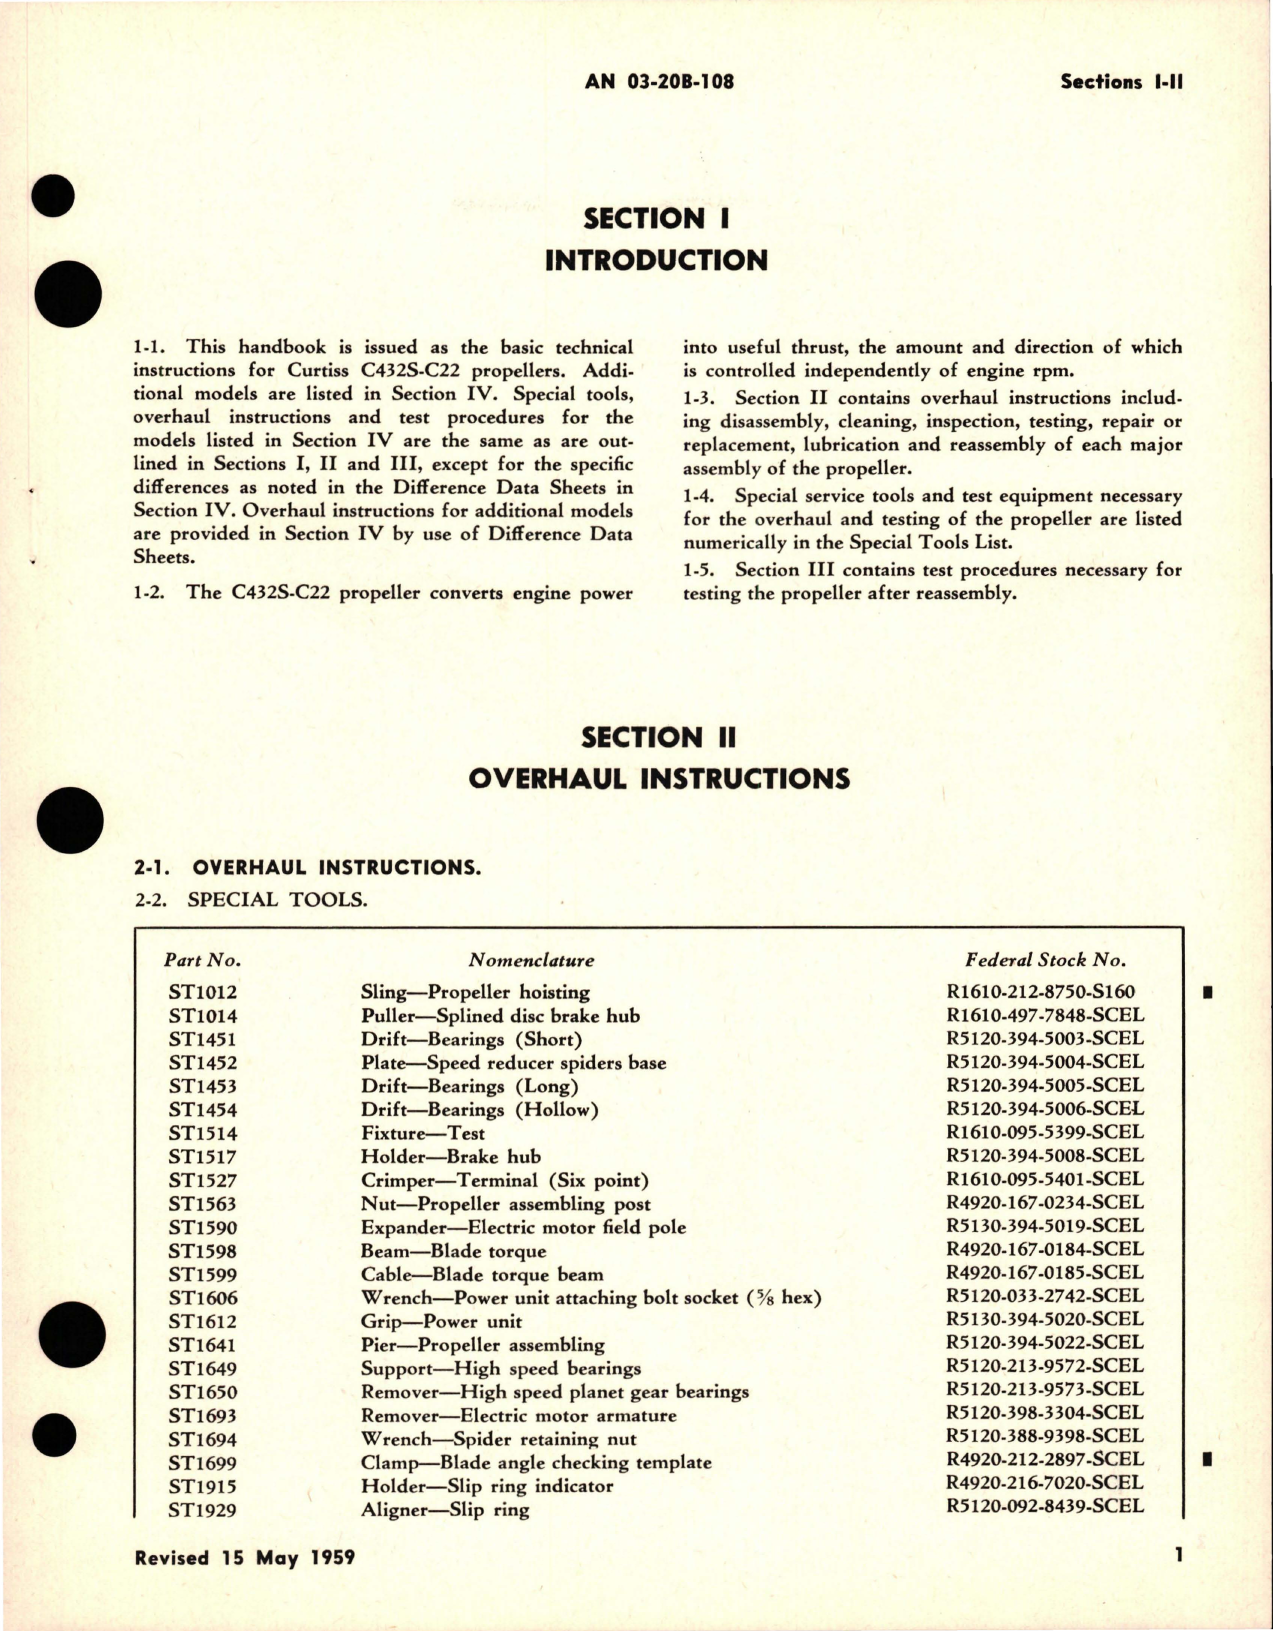 Sample page 7 from AirCorps Library document: Overhaul Instructions for Pitch Lever Type Electric Propeller - Models C432S-C22, C432S-C24, C432S-C26